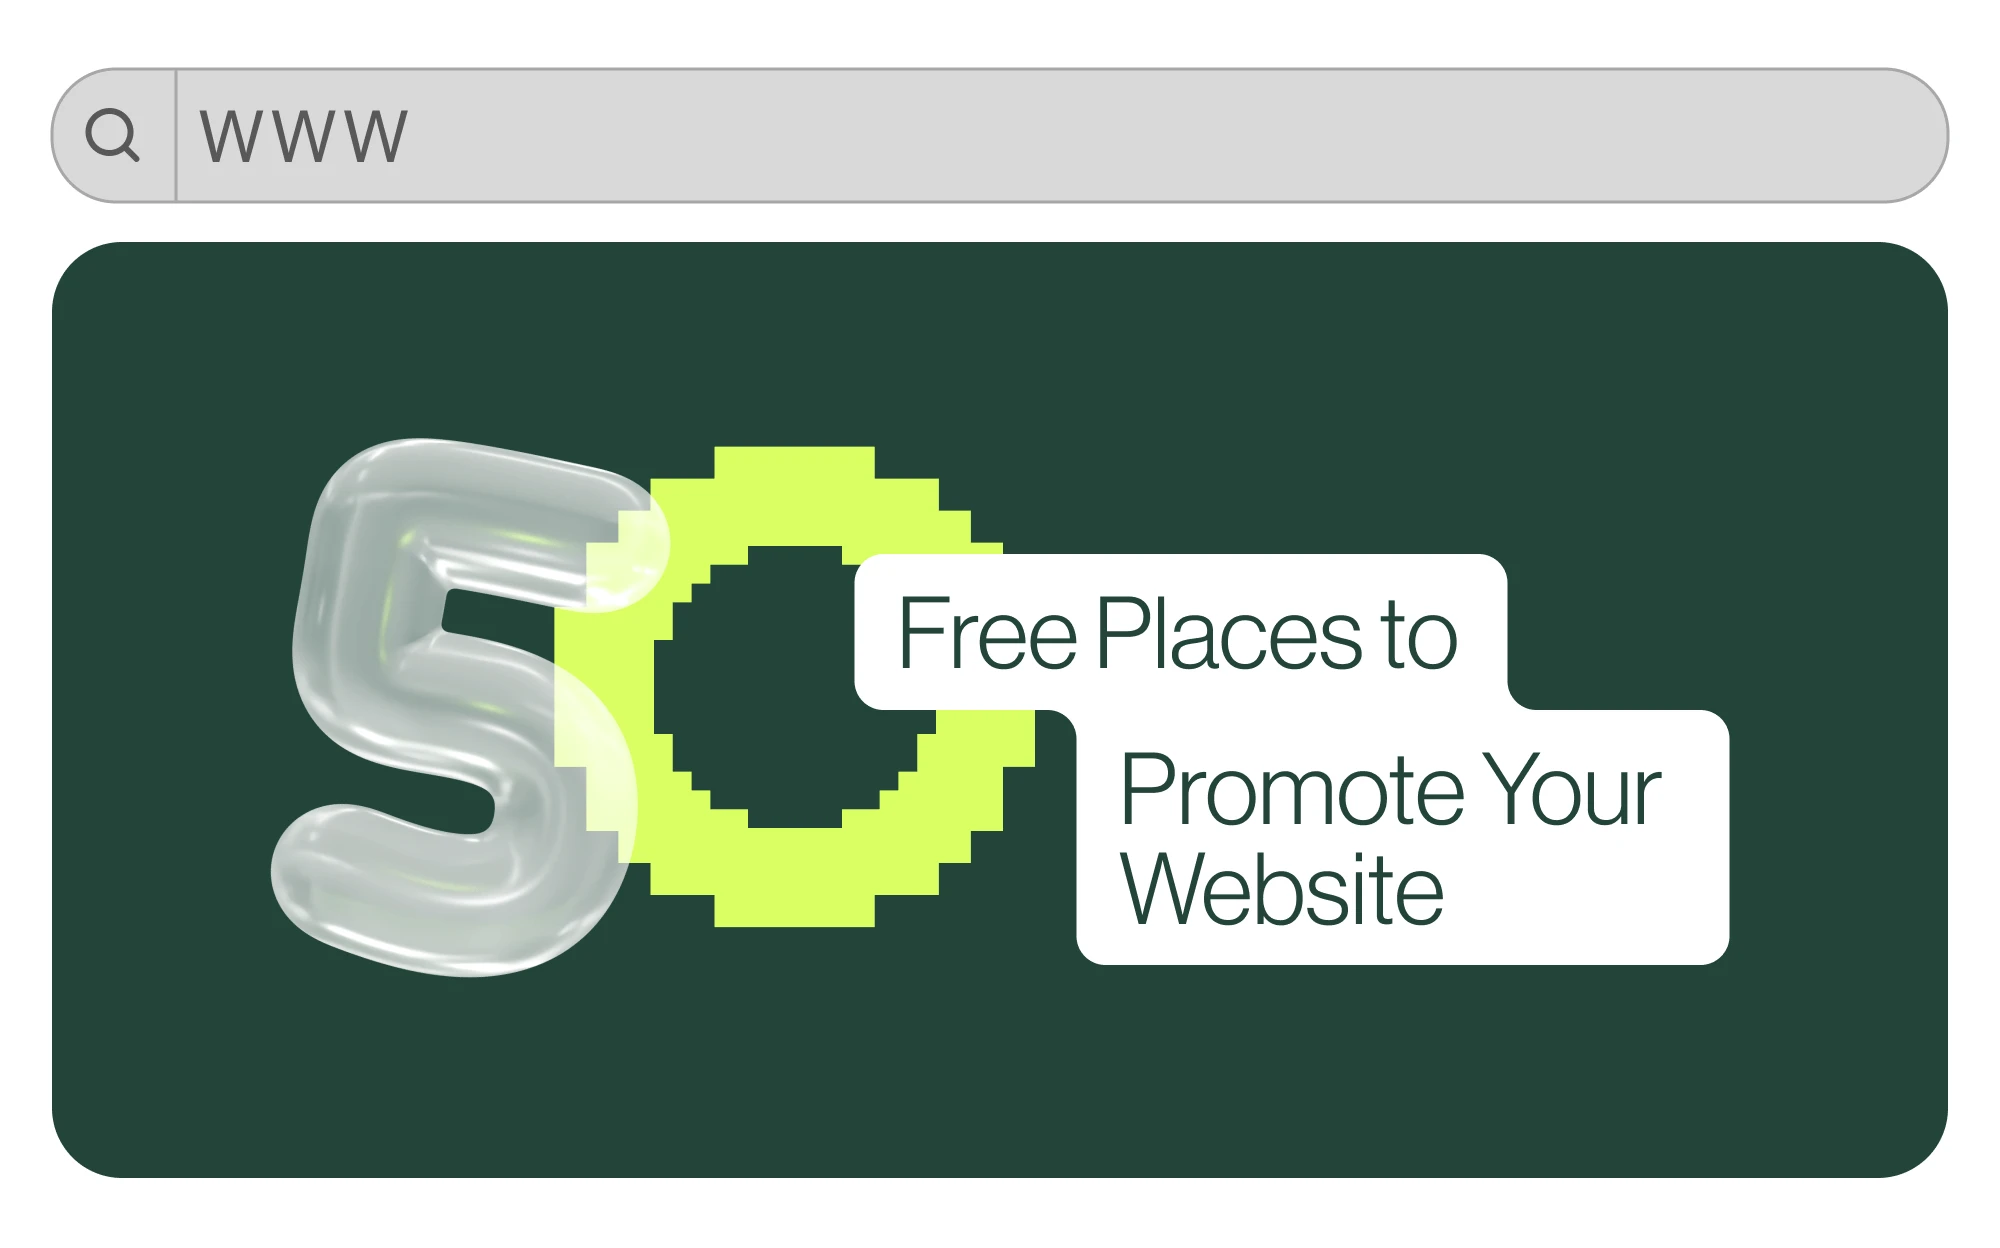 15543-free-places-to-promote-your-website-16959105687461.png